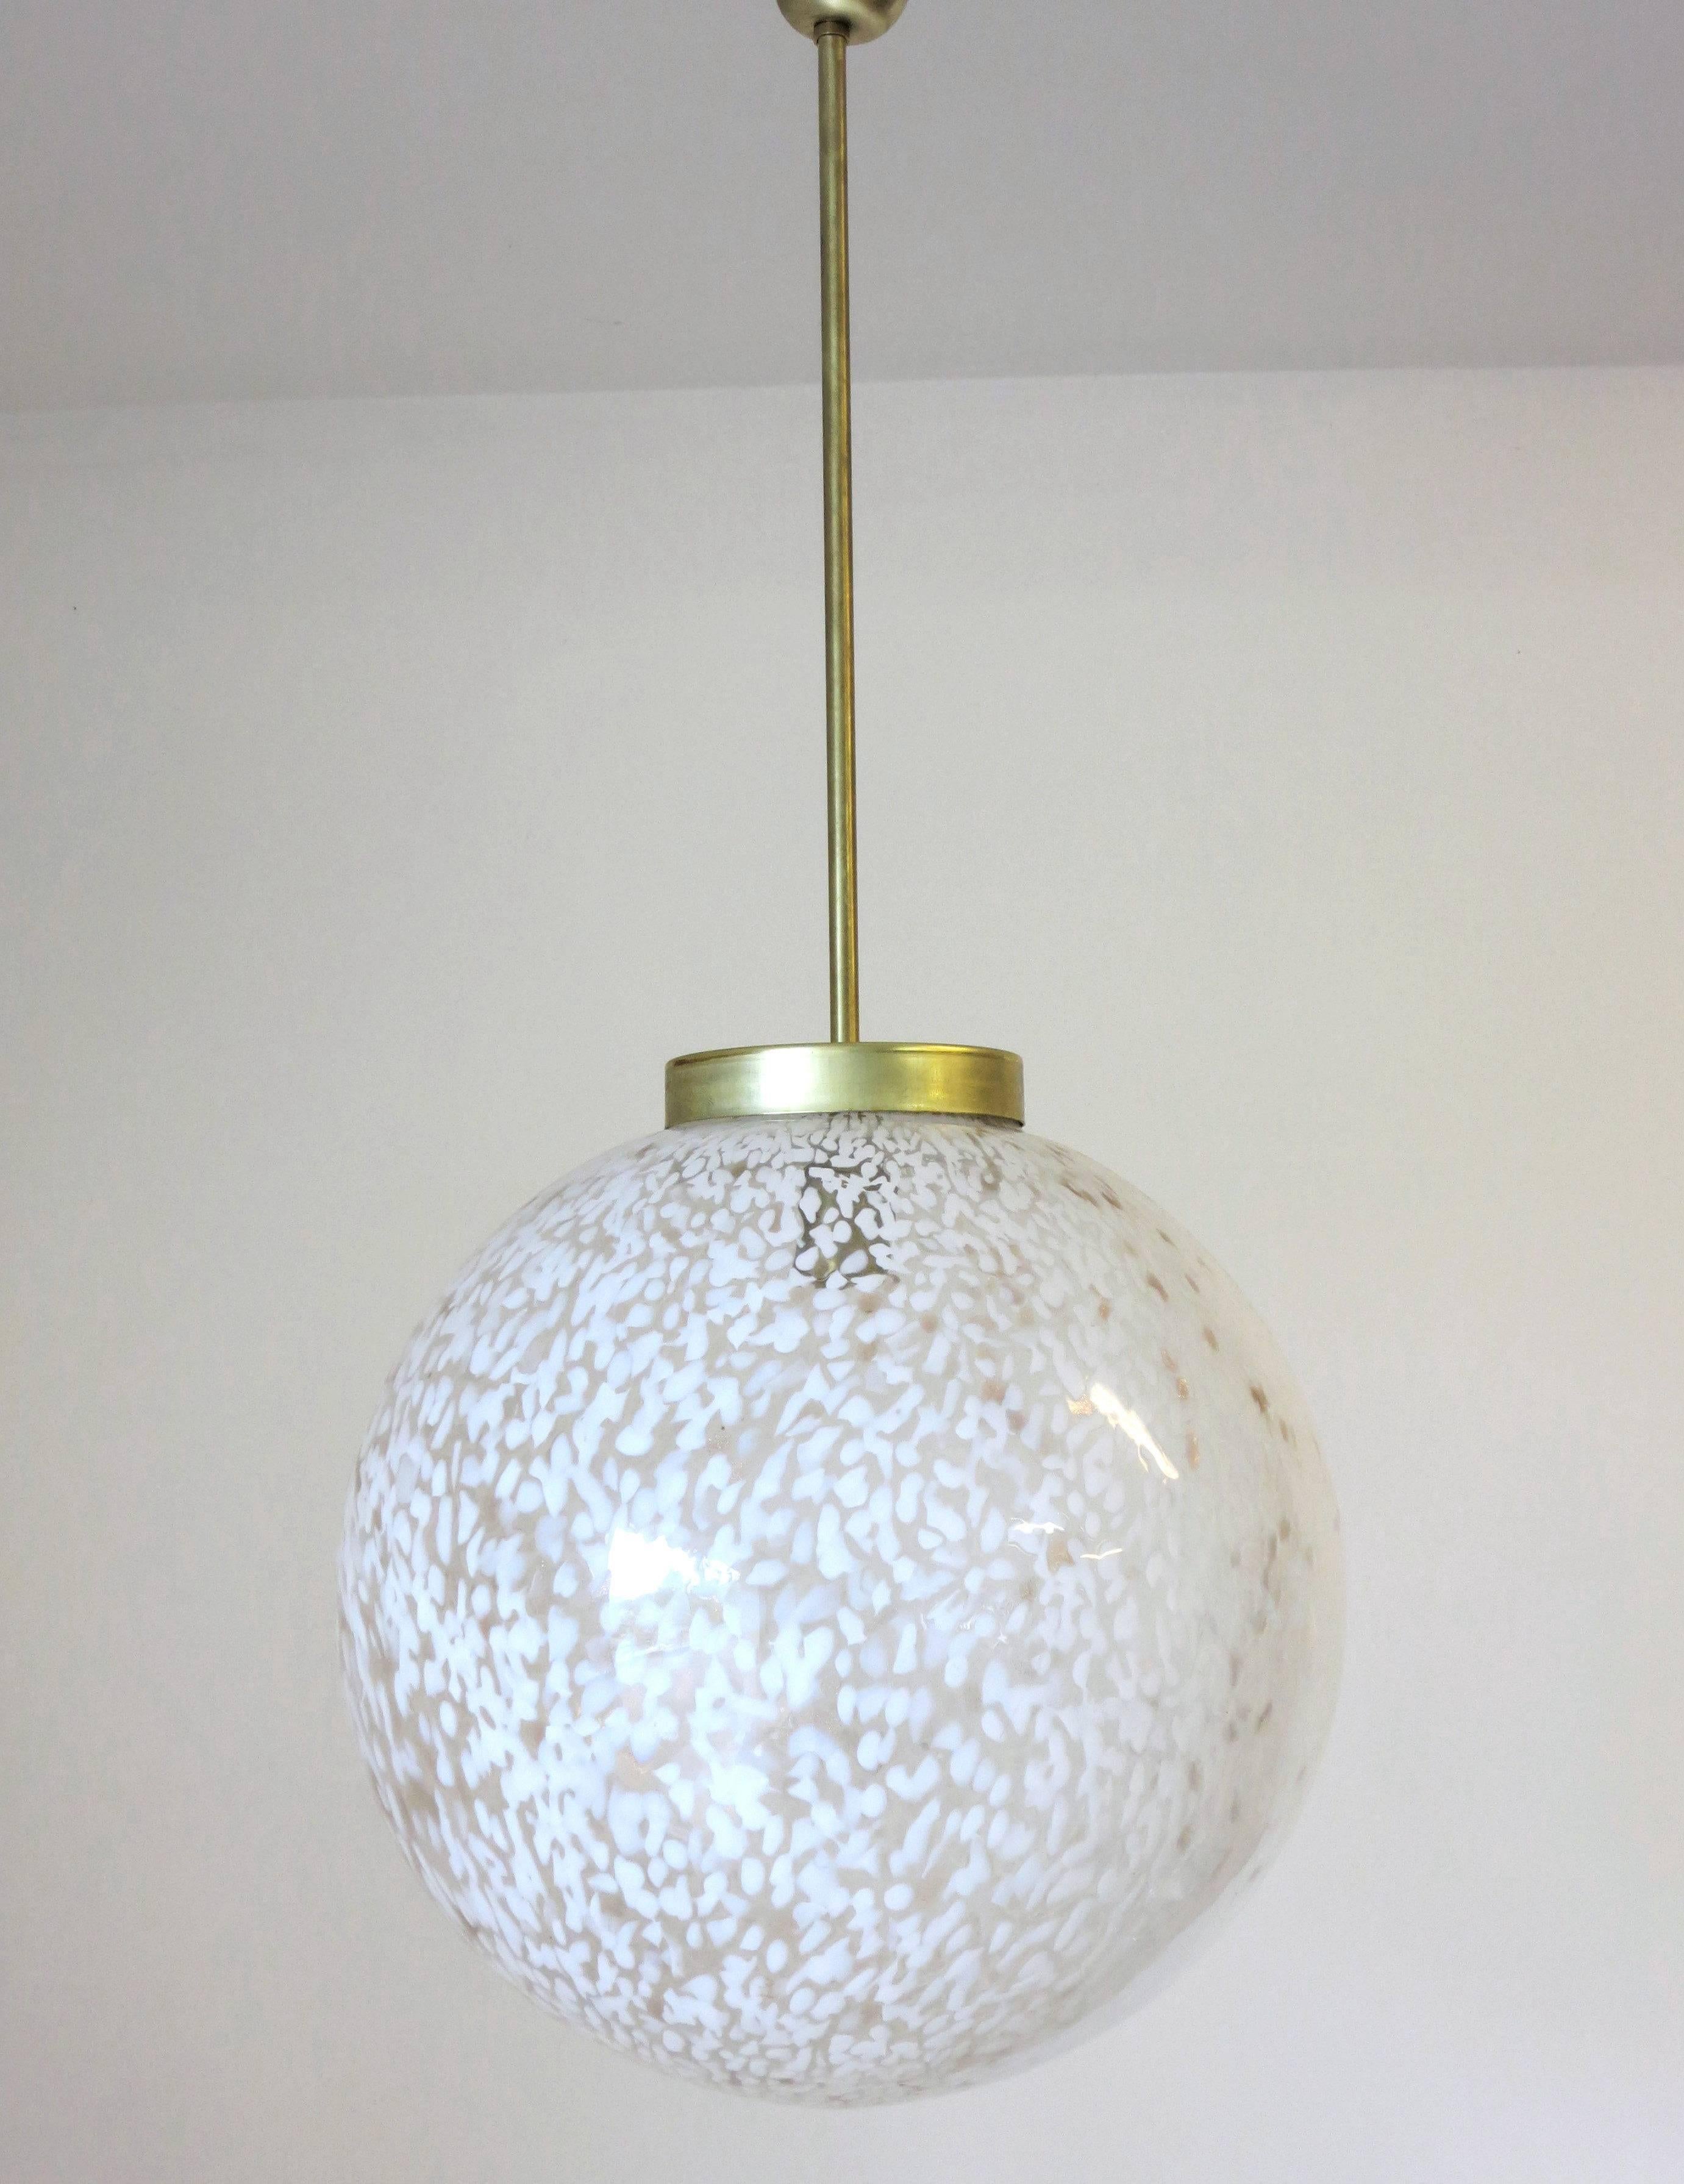 Italian Murano clear and white glass globe pendant.
Single light socket ; wired for the U.S.